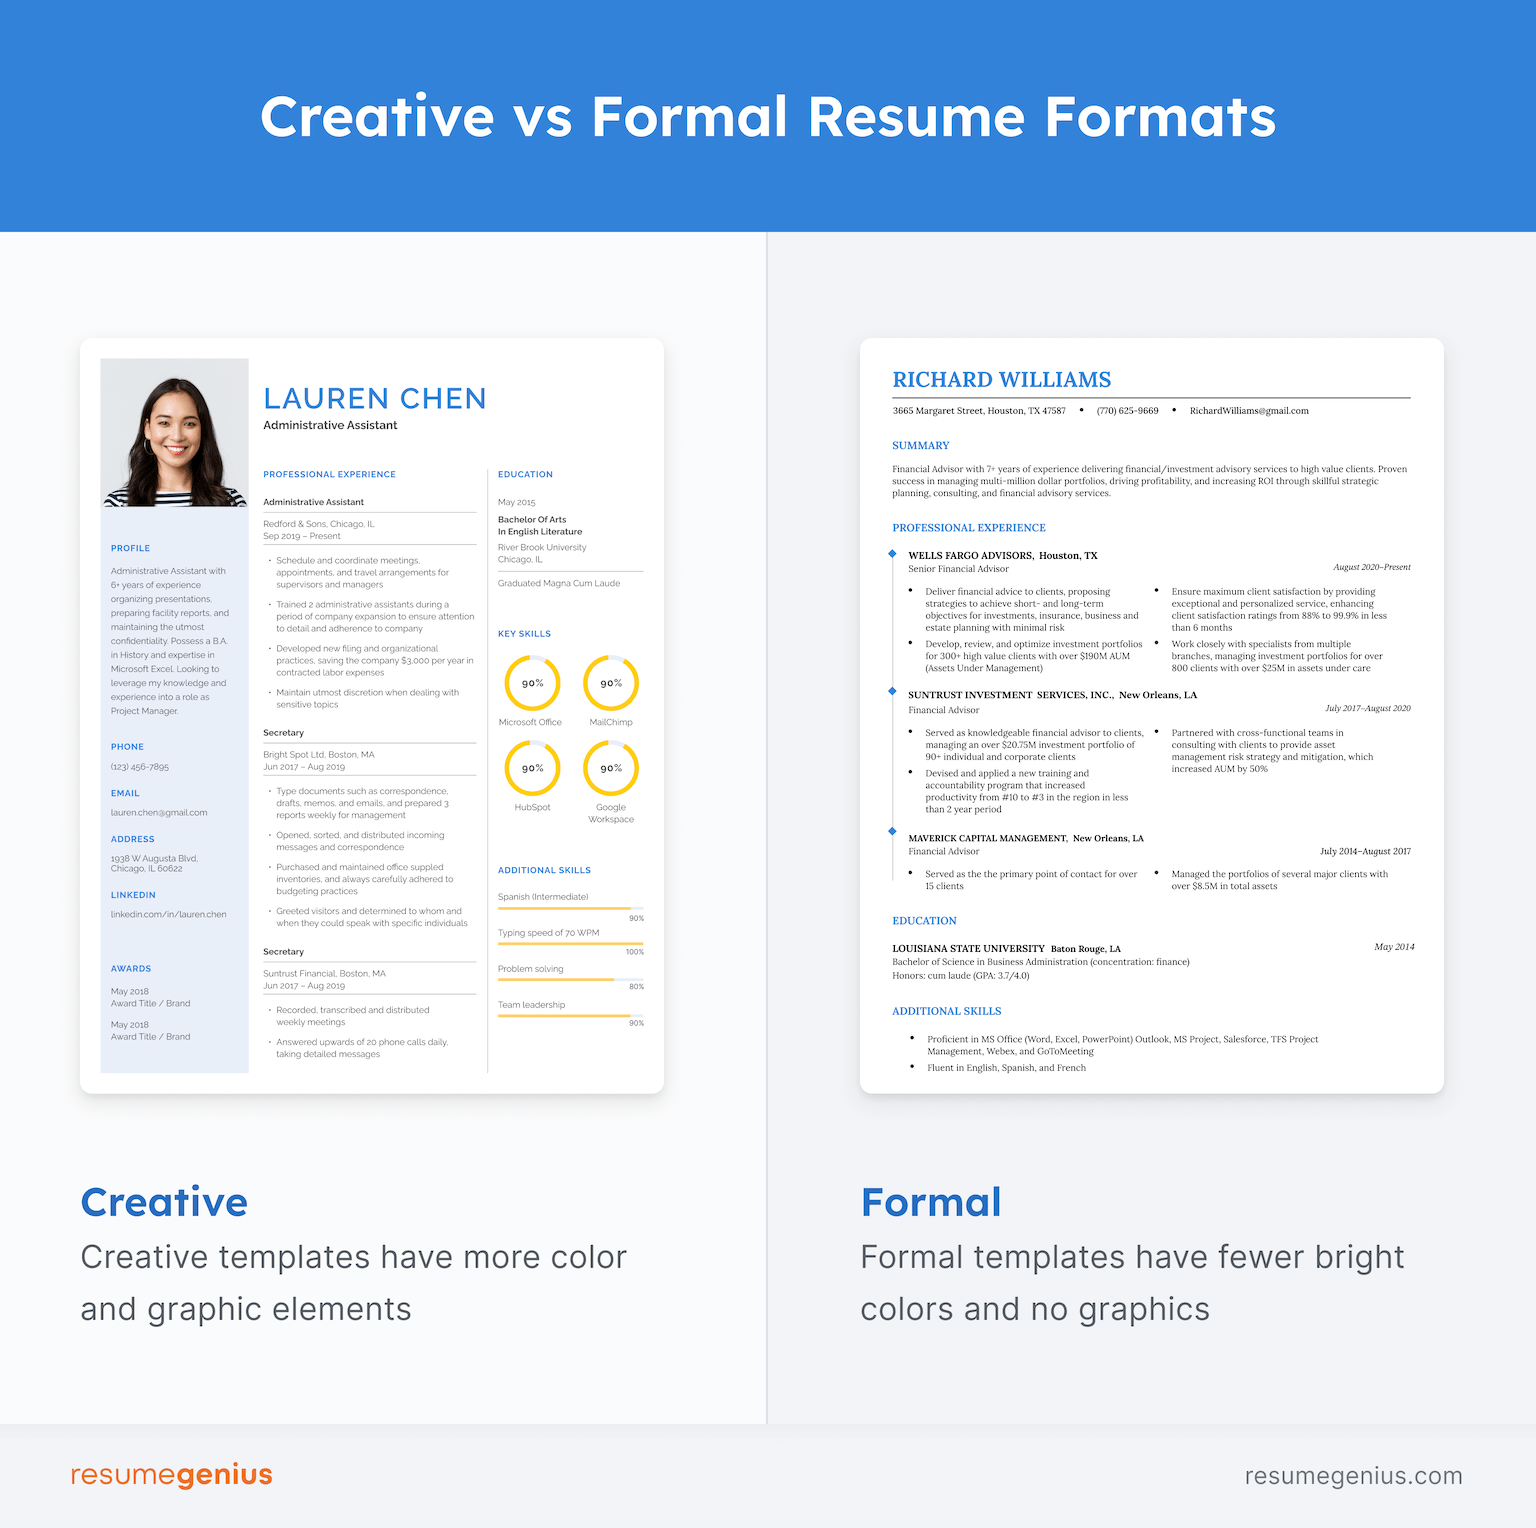 An infographic explaining the key differences between creative and formal resume formats.